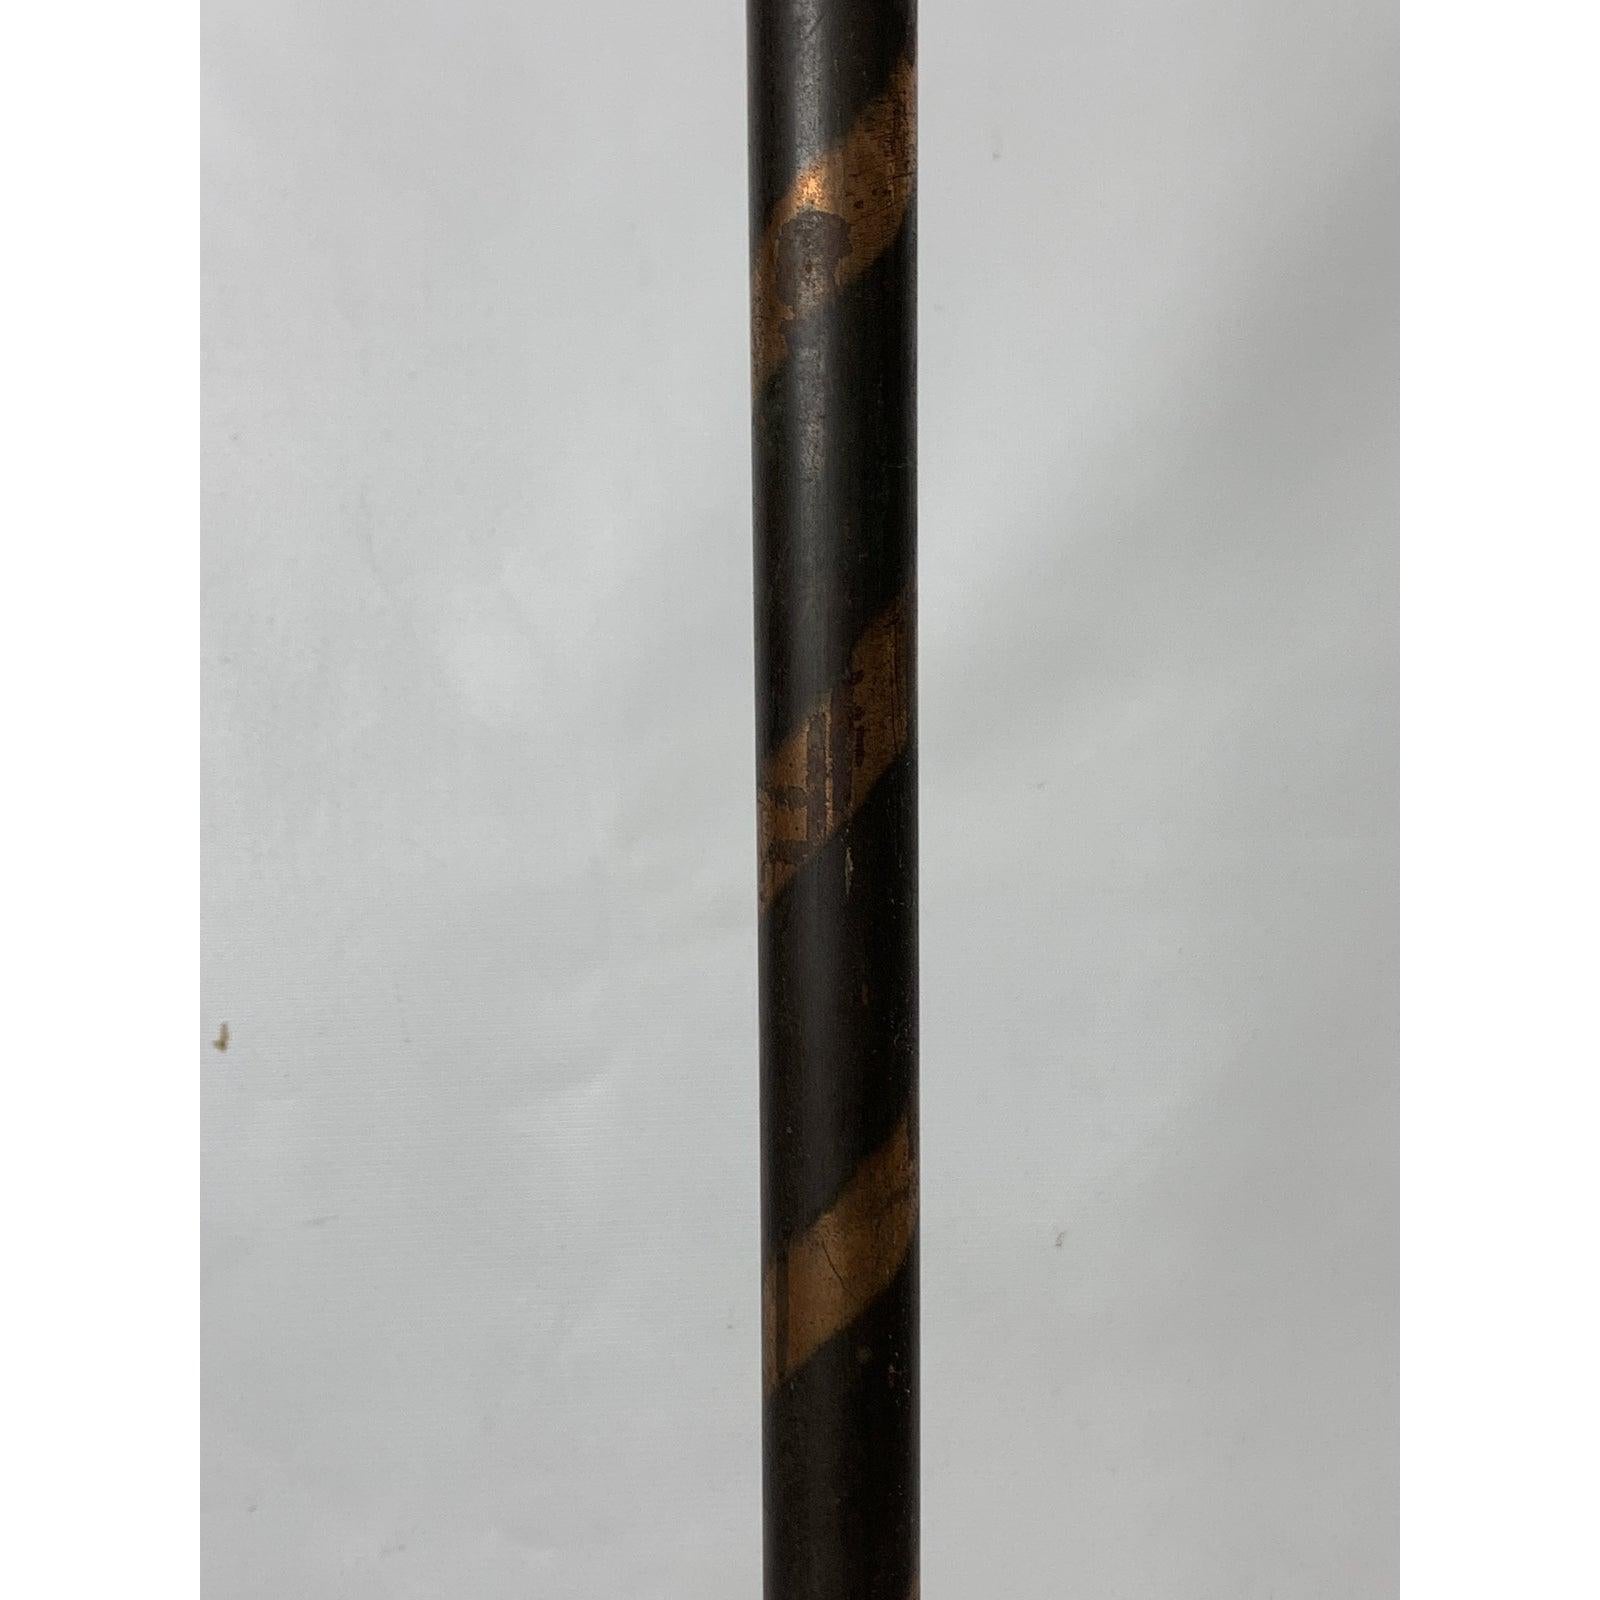 1890s High Quality Castiron/Copper Coat Rack In Good Condition For Sale In Esperance, NY